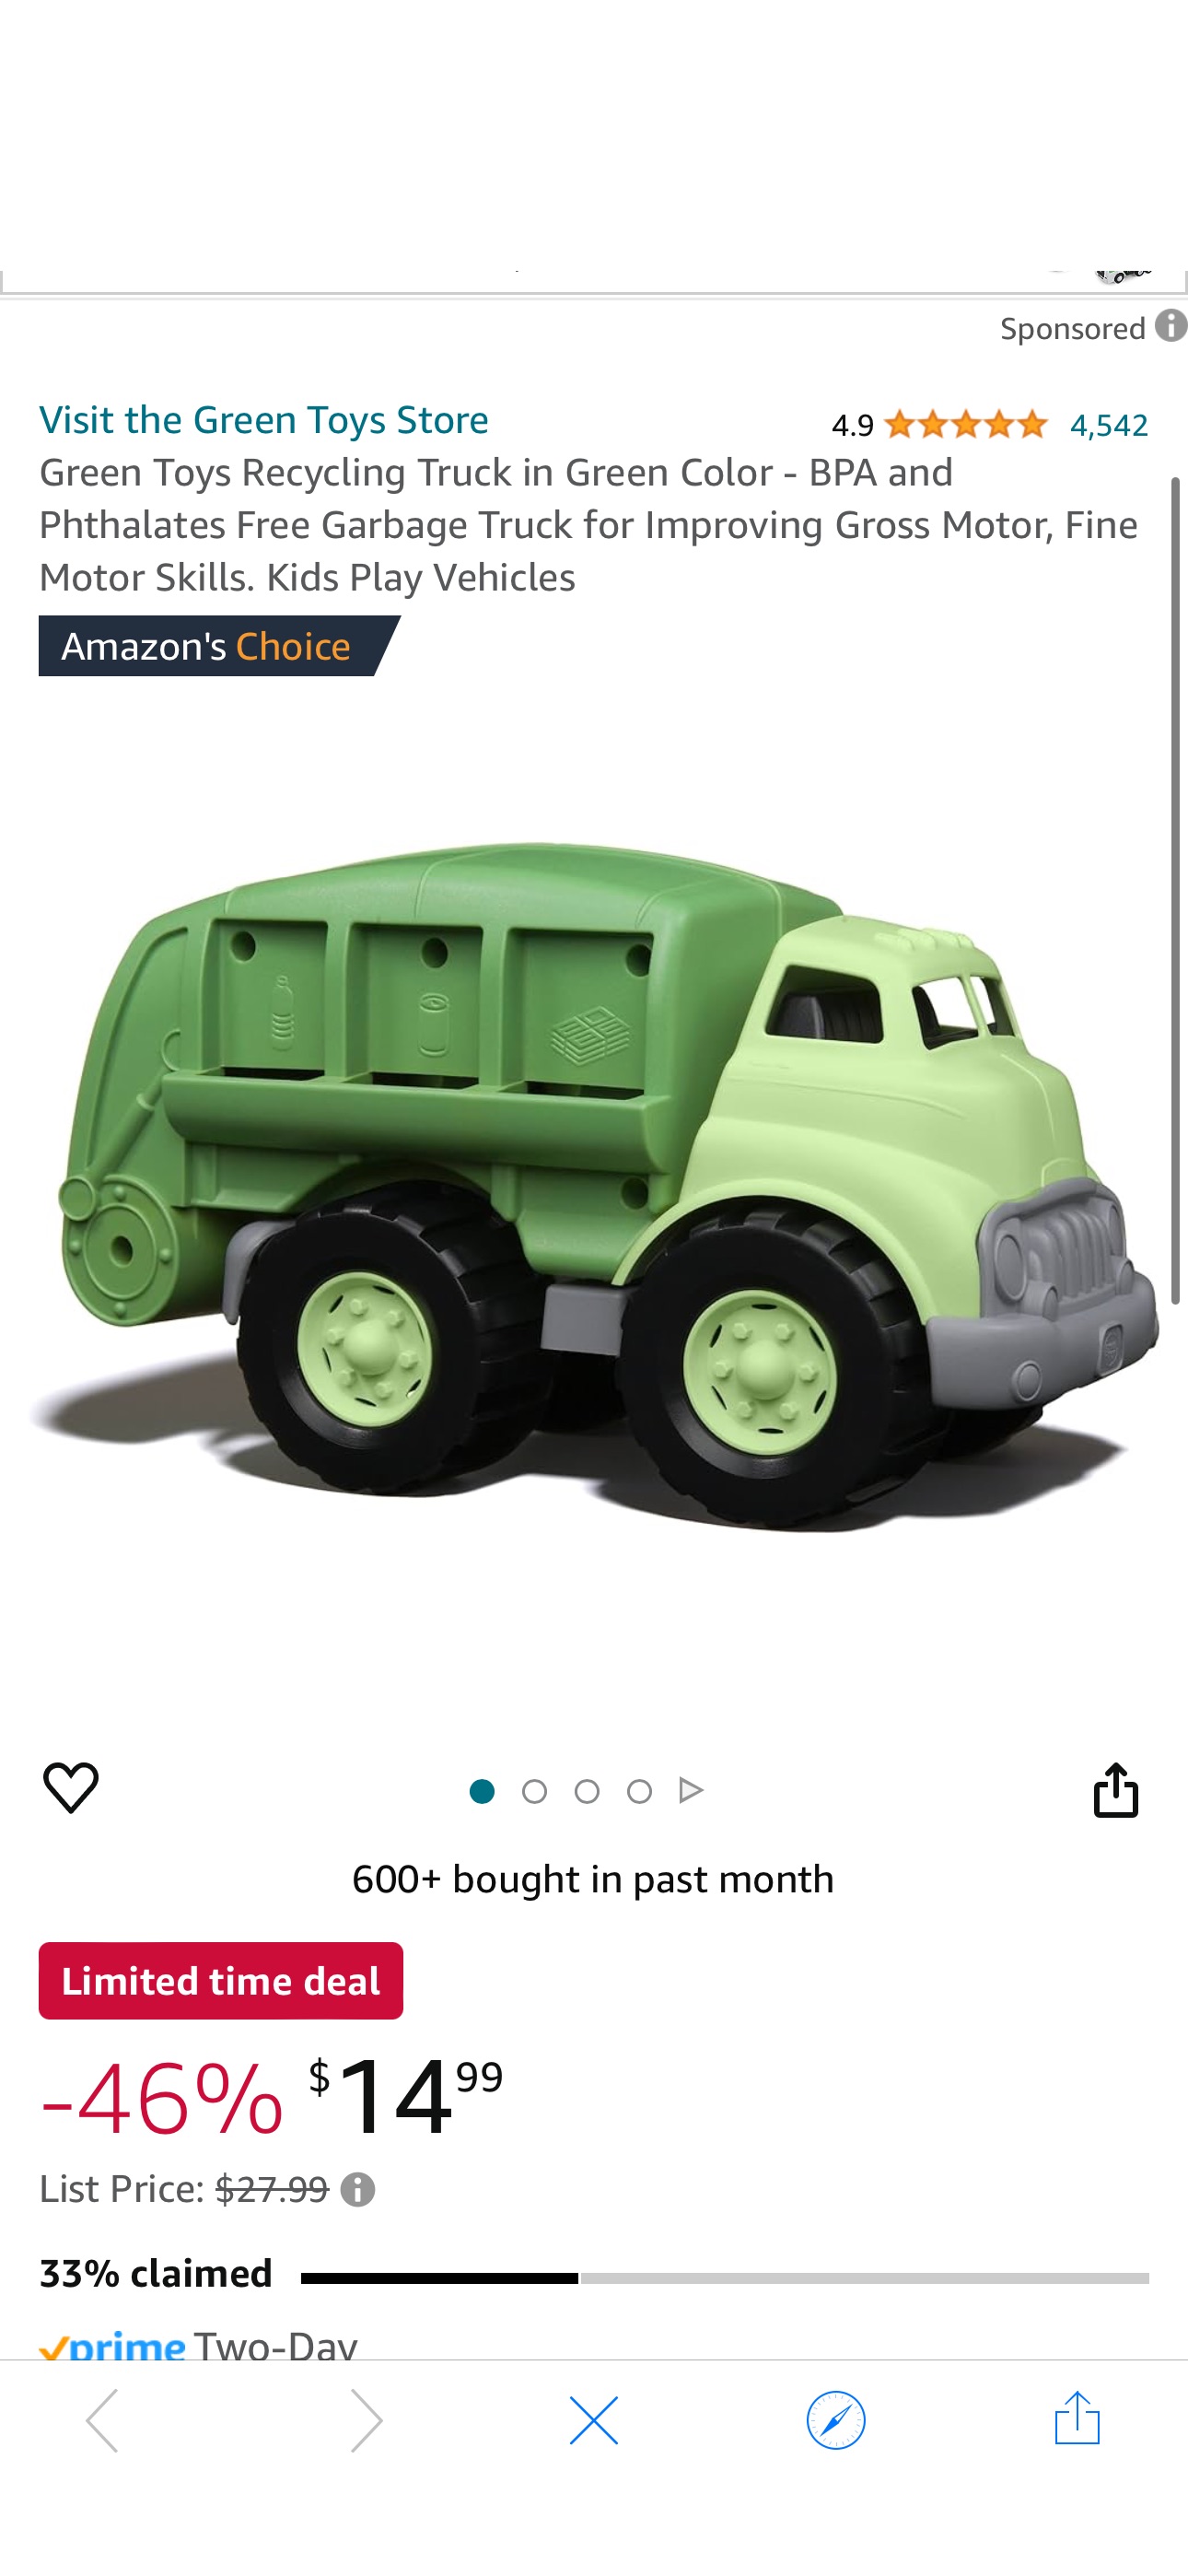 Amazon.com: Green Toys Recycling Truck in Green Color - BPA and Phthalates Free Garbage Truck for Improving Gross Motor, Fine Motor Skills. Kids Play Vehicles : Toys & Games